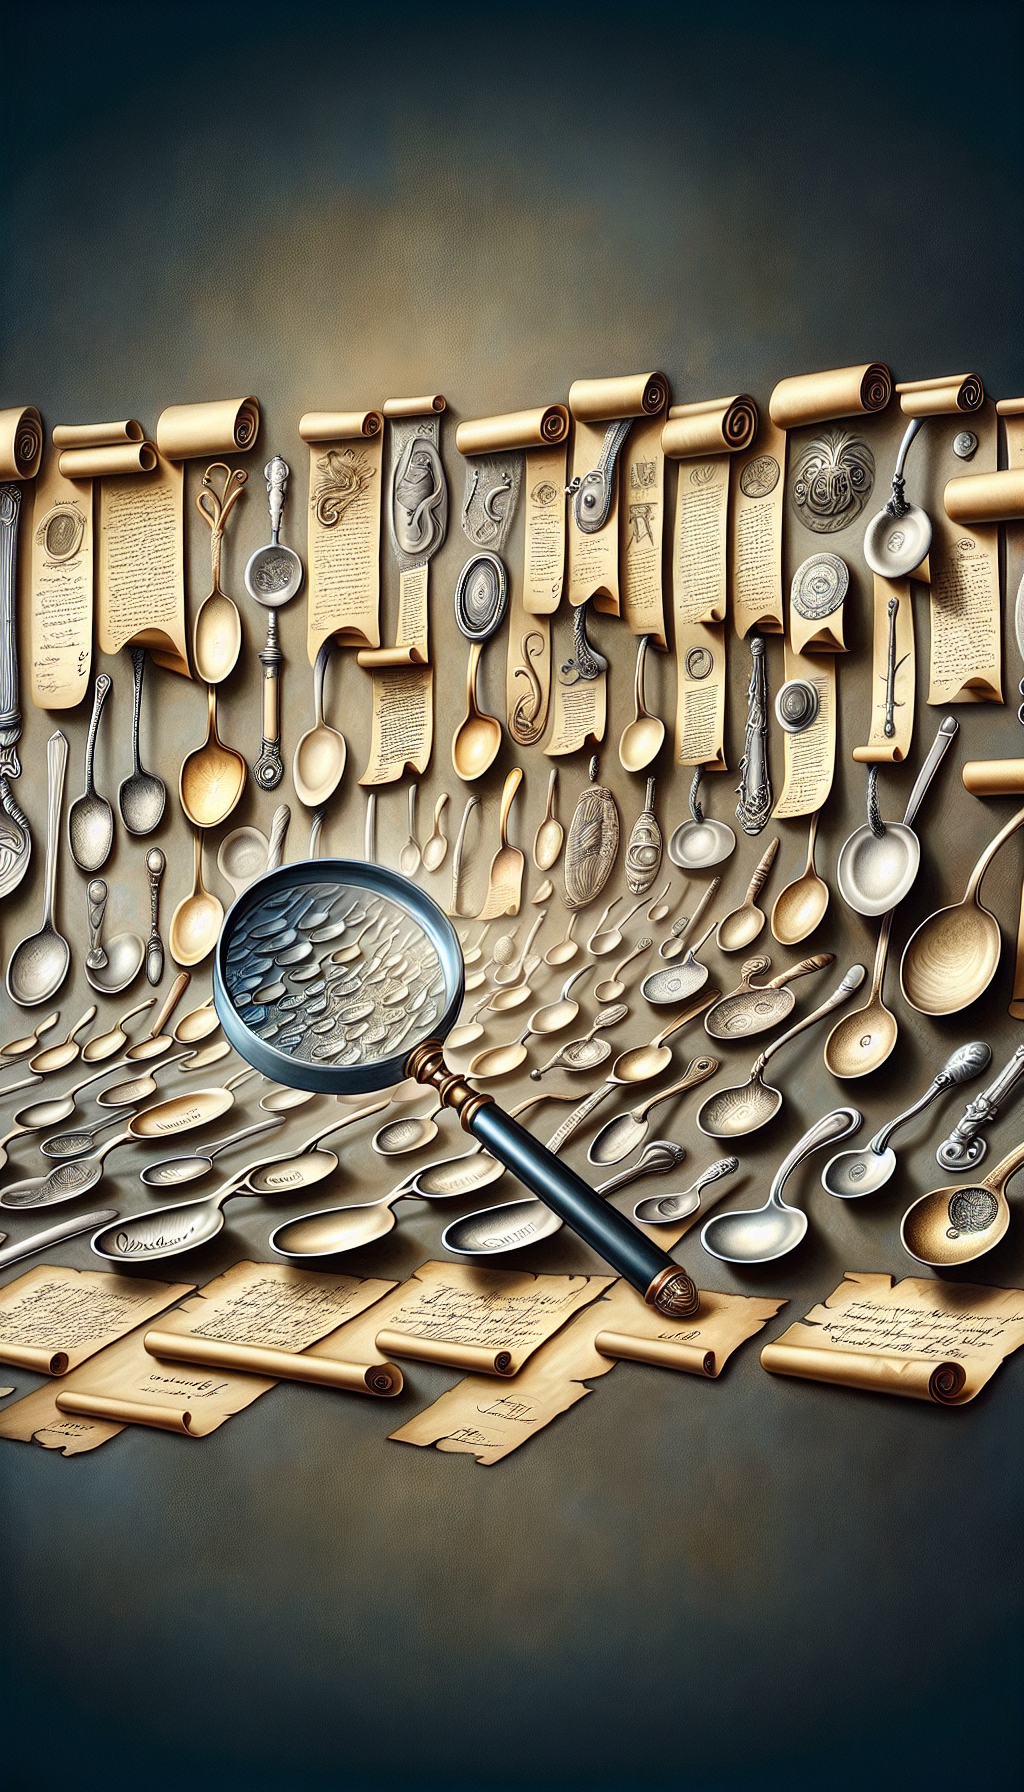 An elegantly detailed tableau showcases a magnifying glass hovering over an assortment of antique spoons, each engraved with the unique marks of famed spoonsmiths. Their silhouettes reflect diverse historical periods, and beneath them, translucent scrolls unfurl with expert penned names and dates. The whimsical mixture of realism and caricature adds a playful depth to the illustration.